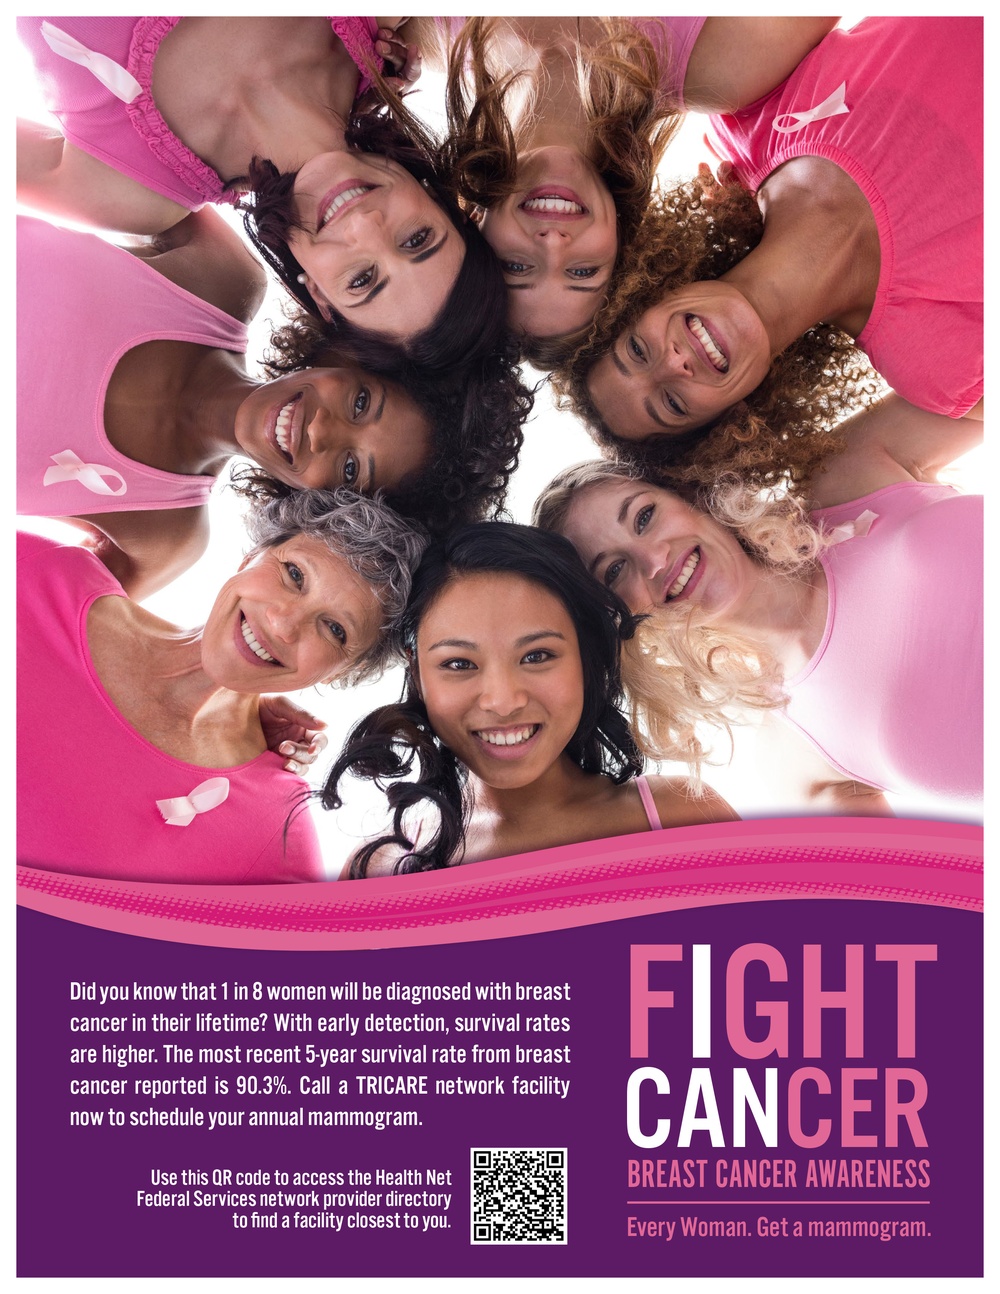 Breast Cancer Awareness Month - flyer